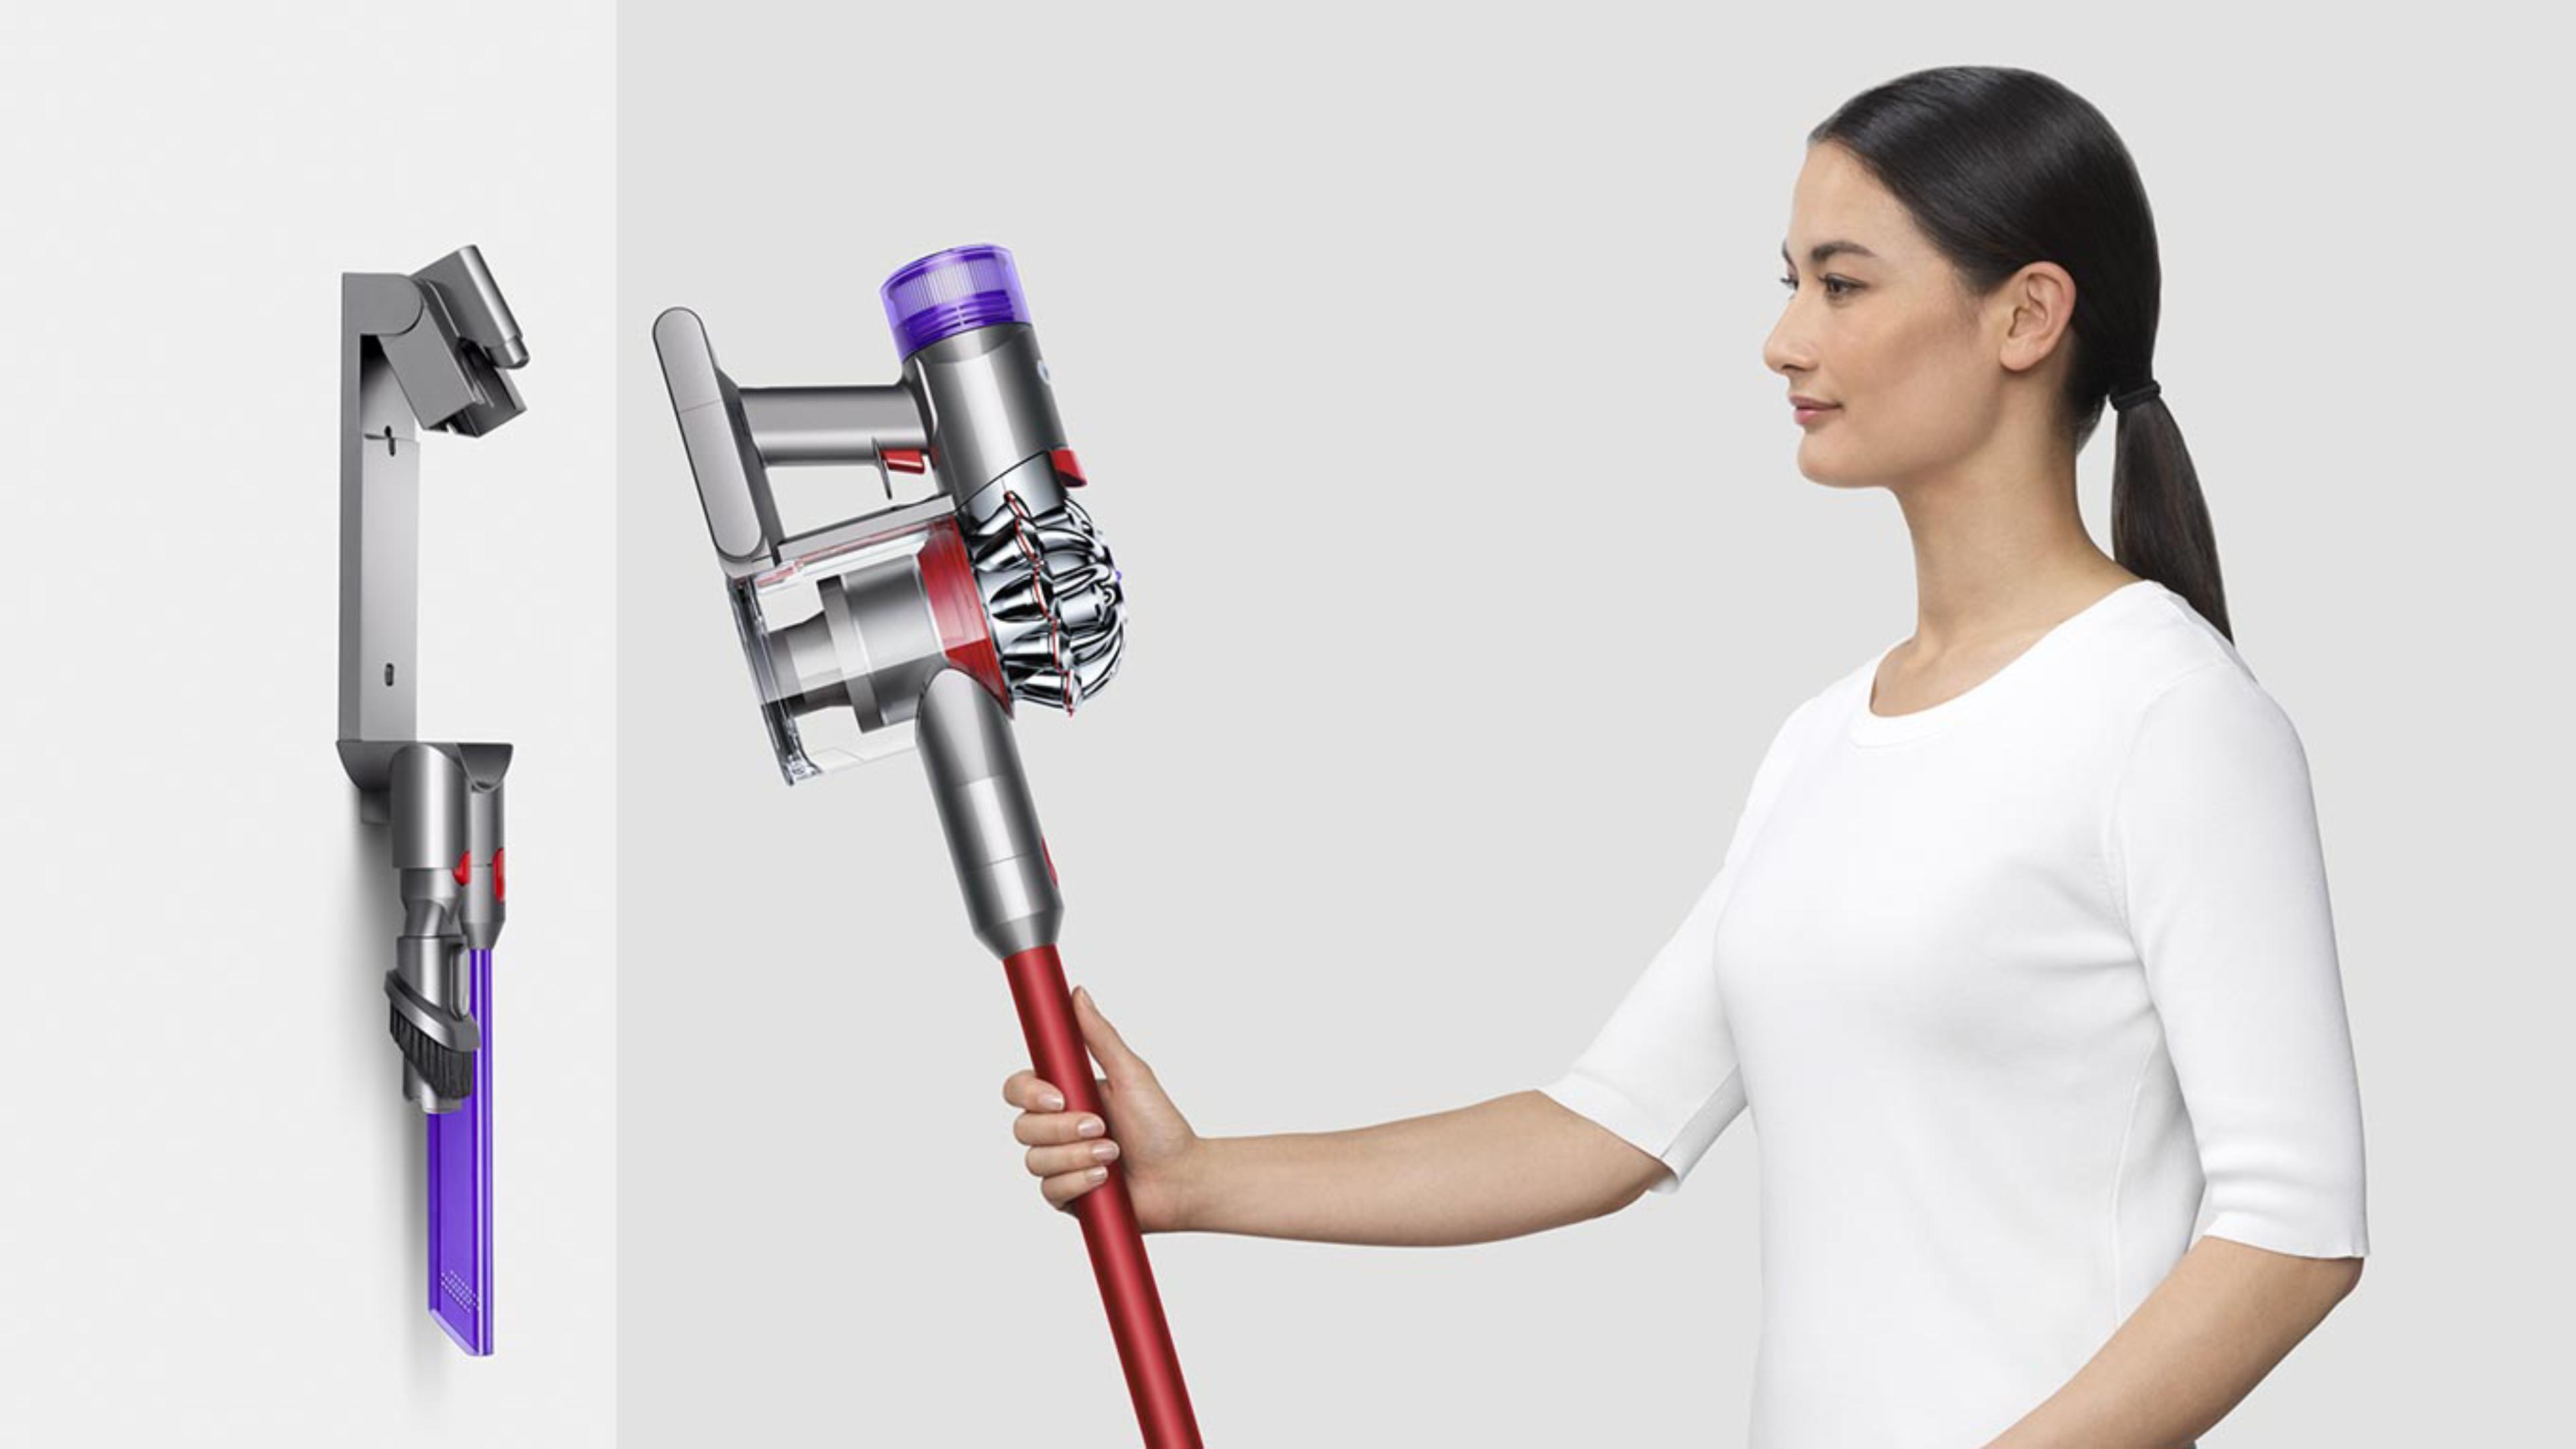 A lady returning the Dyson V8™ vacuum to the charging dock